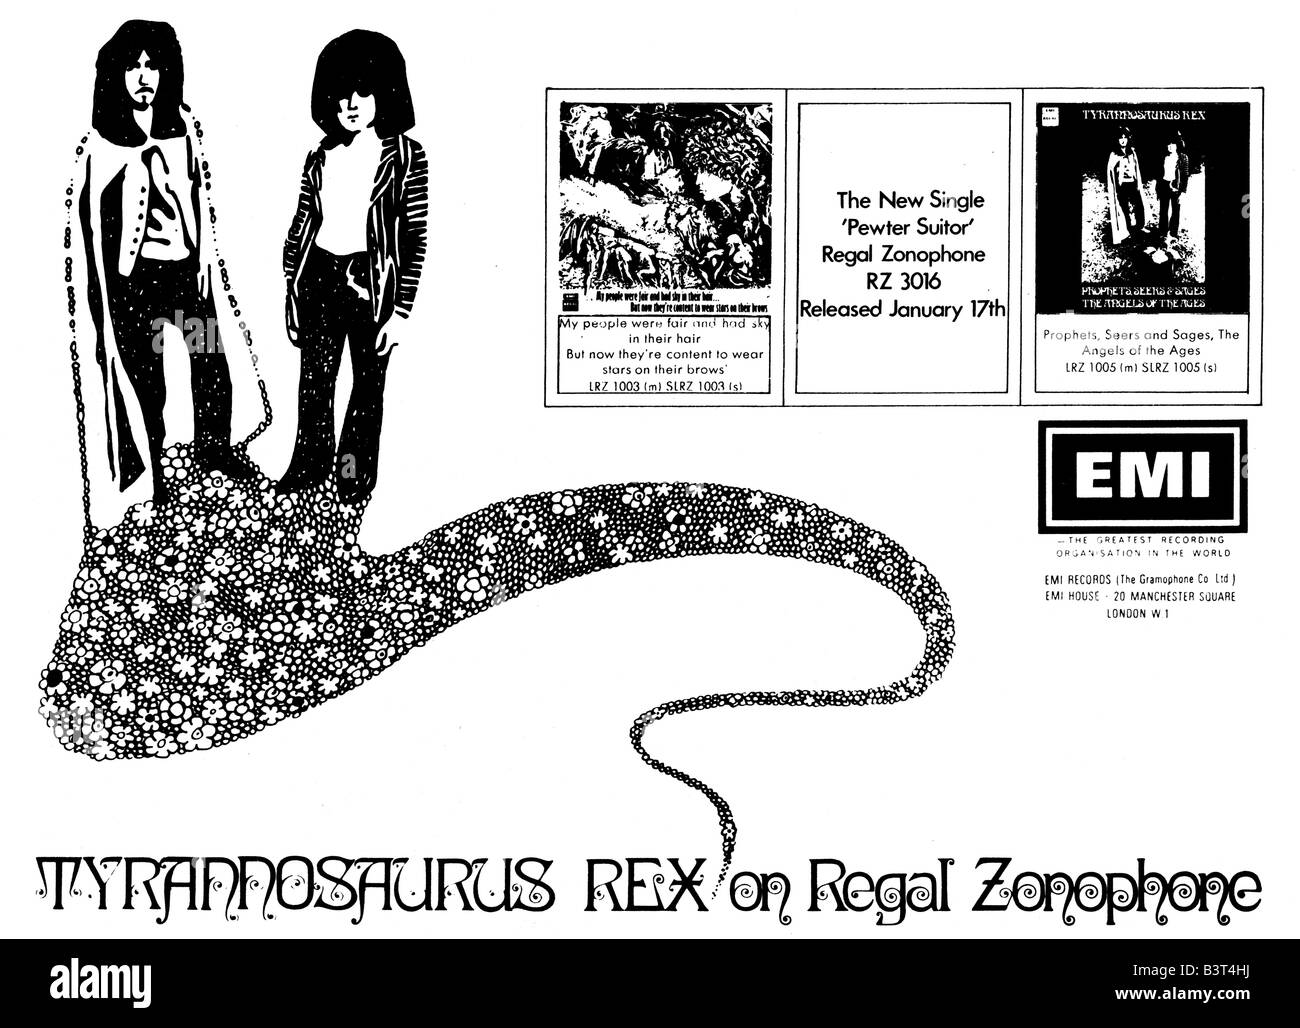 1969 advertisement for records by Tyrannosaurus Rex single and album. FOR EDITORIAL USE ONLY Stock Photo